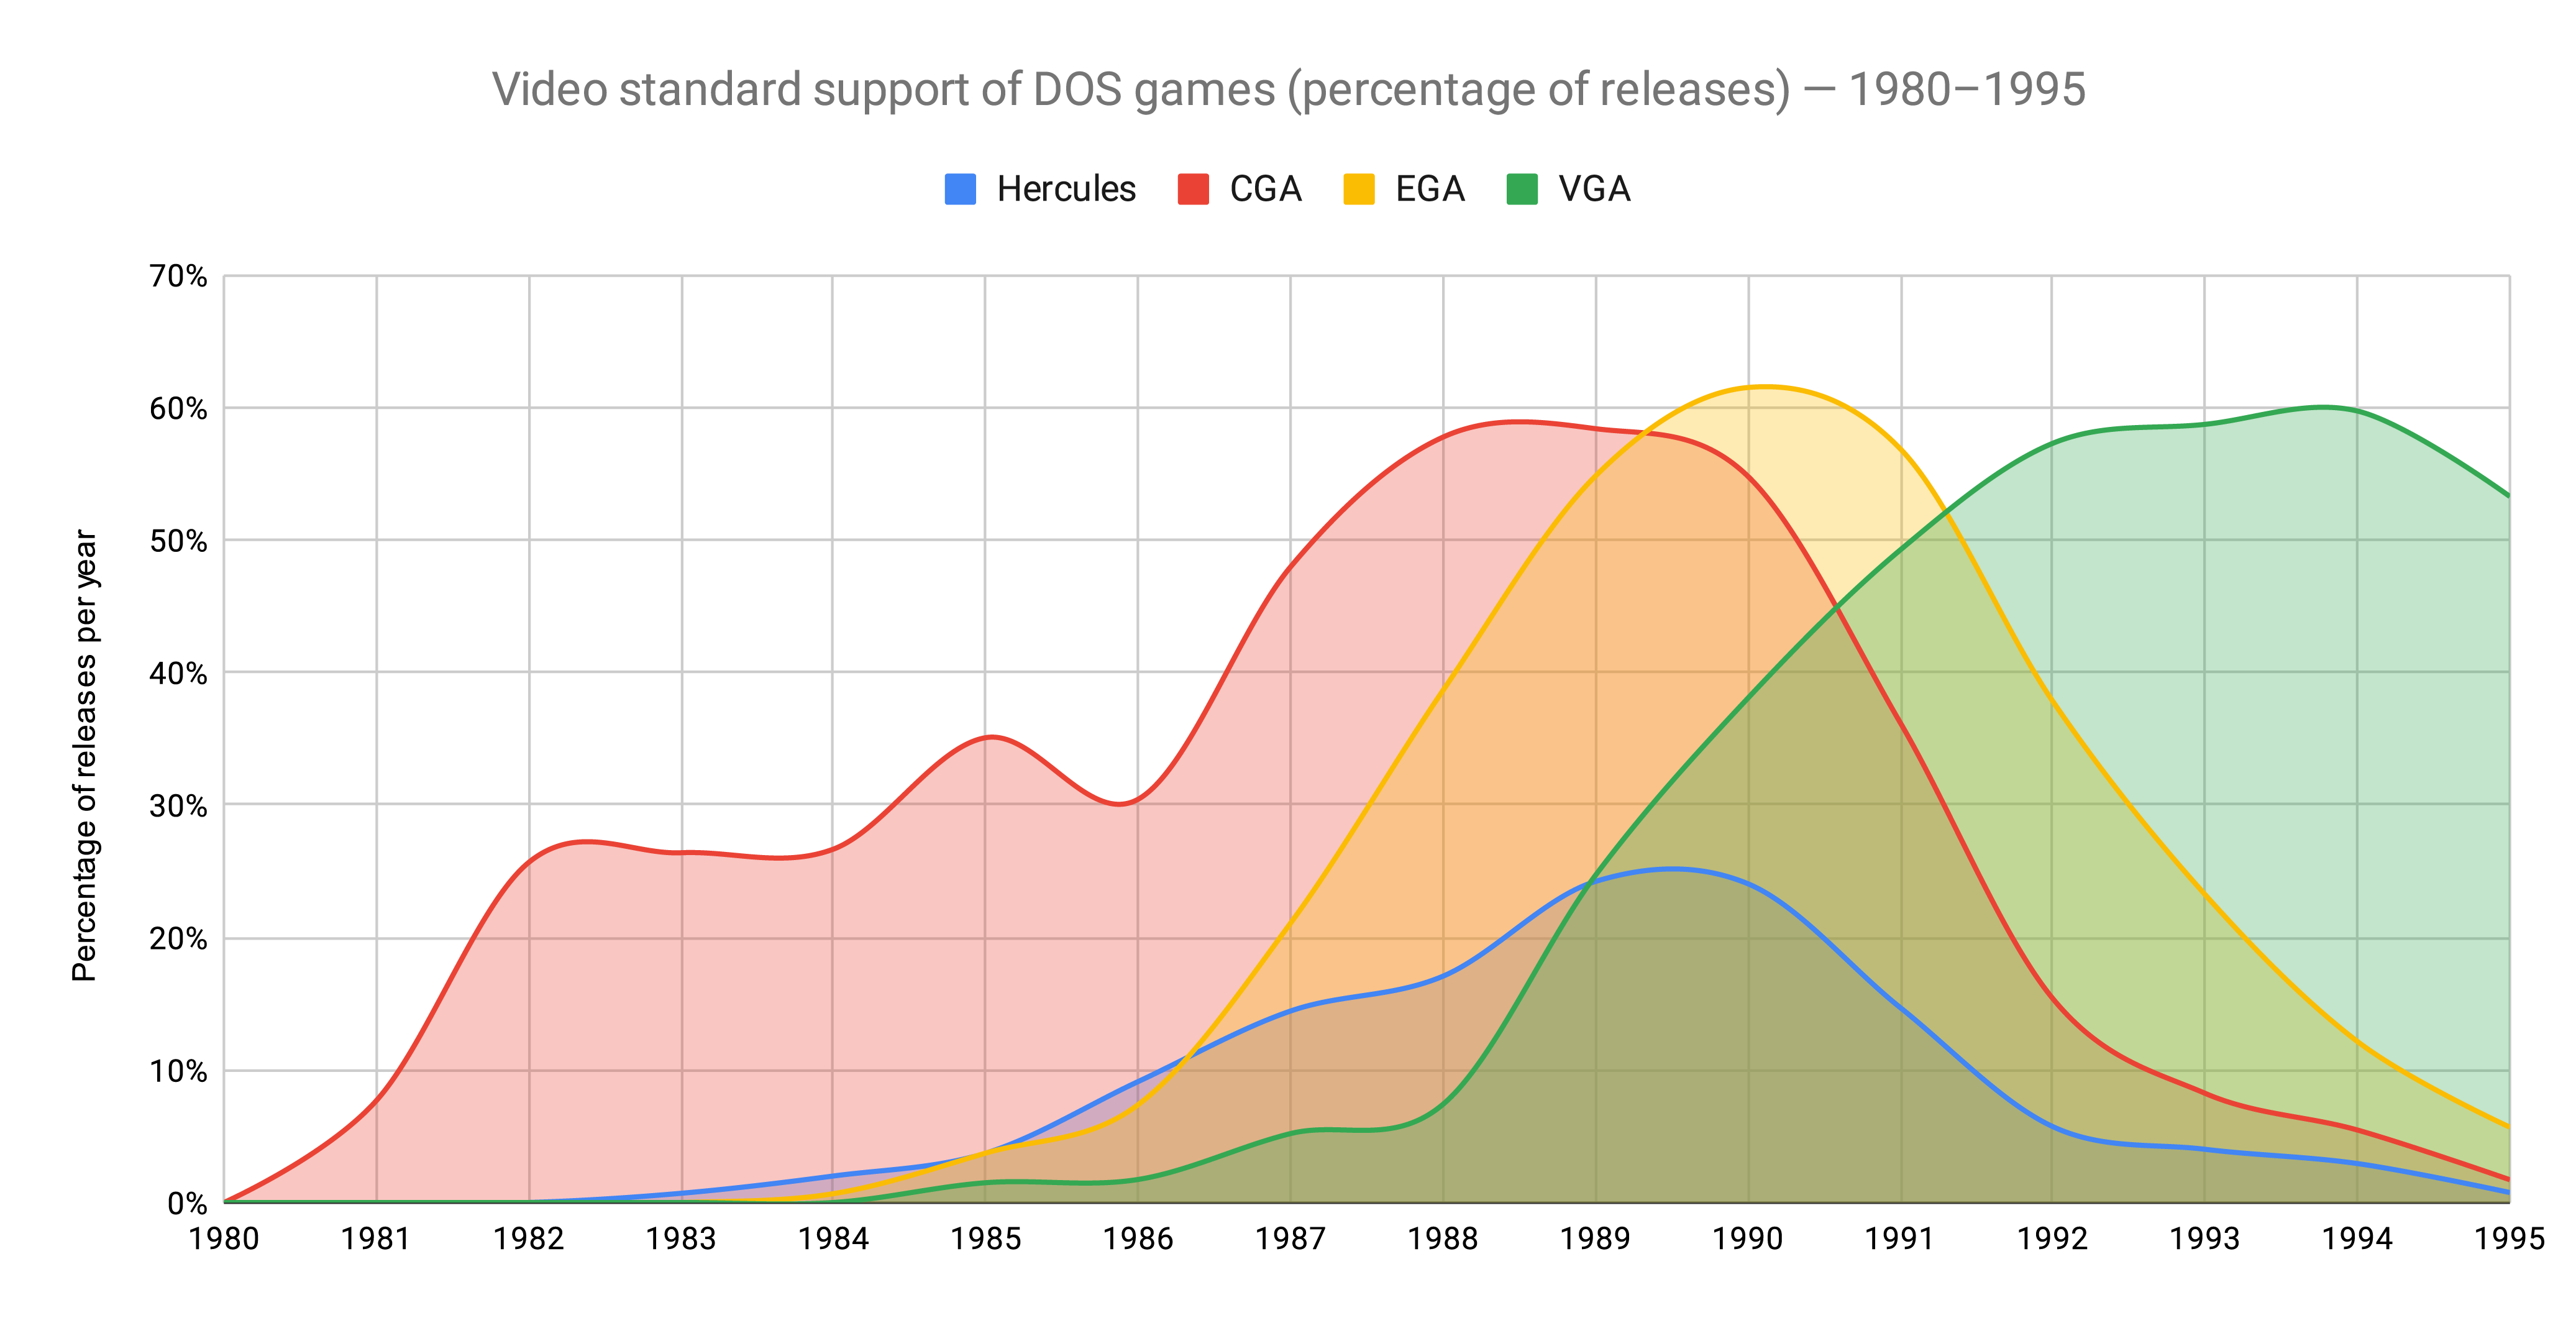 Video standard support of DOS games (percentage of releases) between 1980-1995